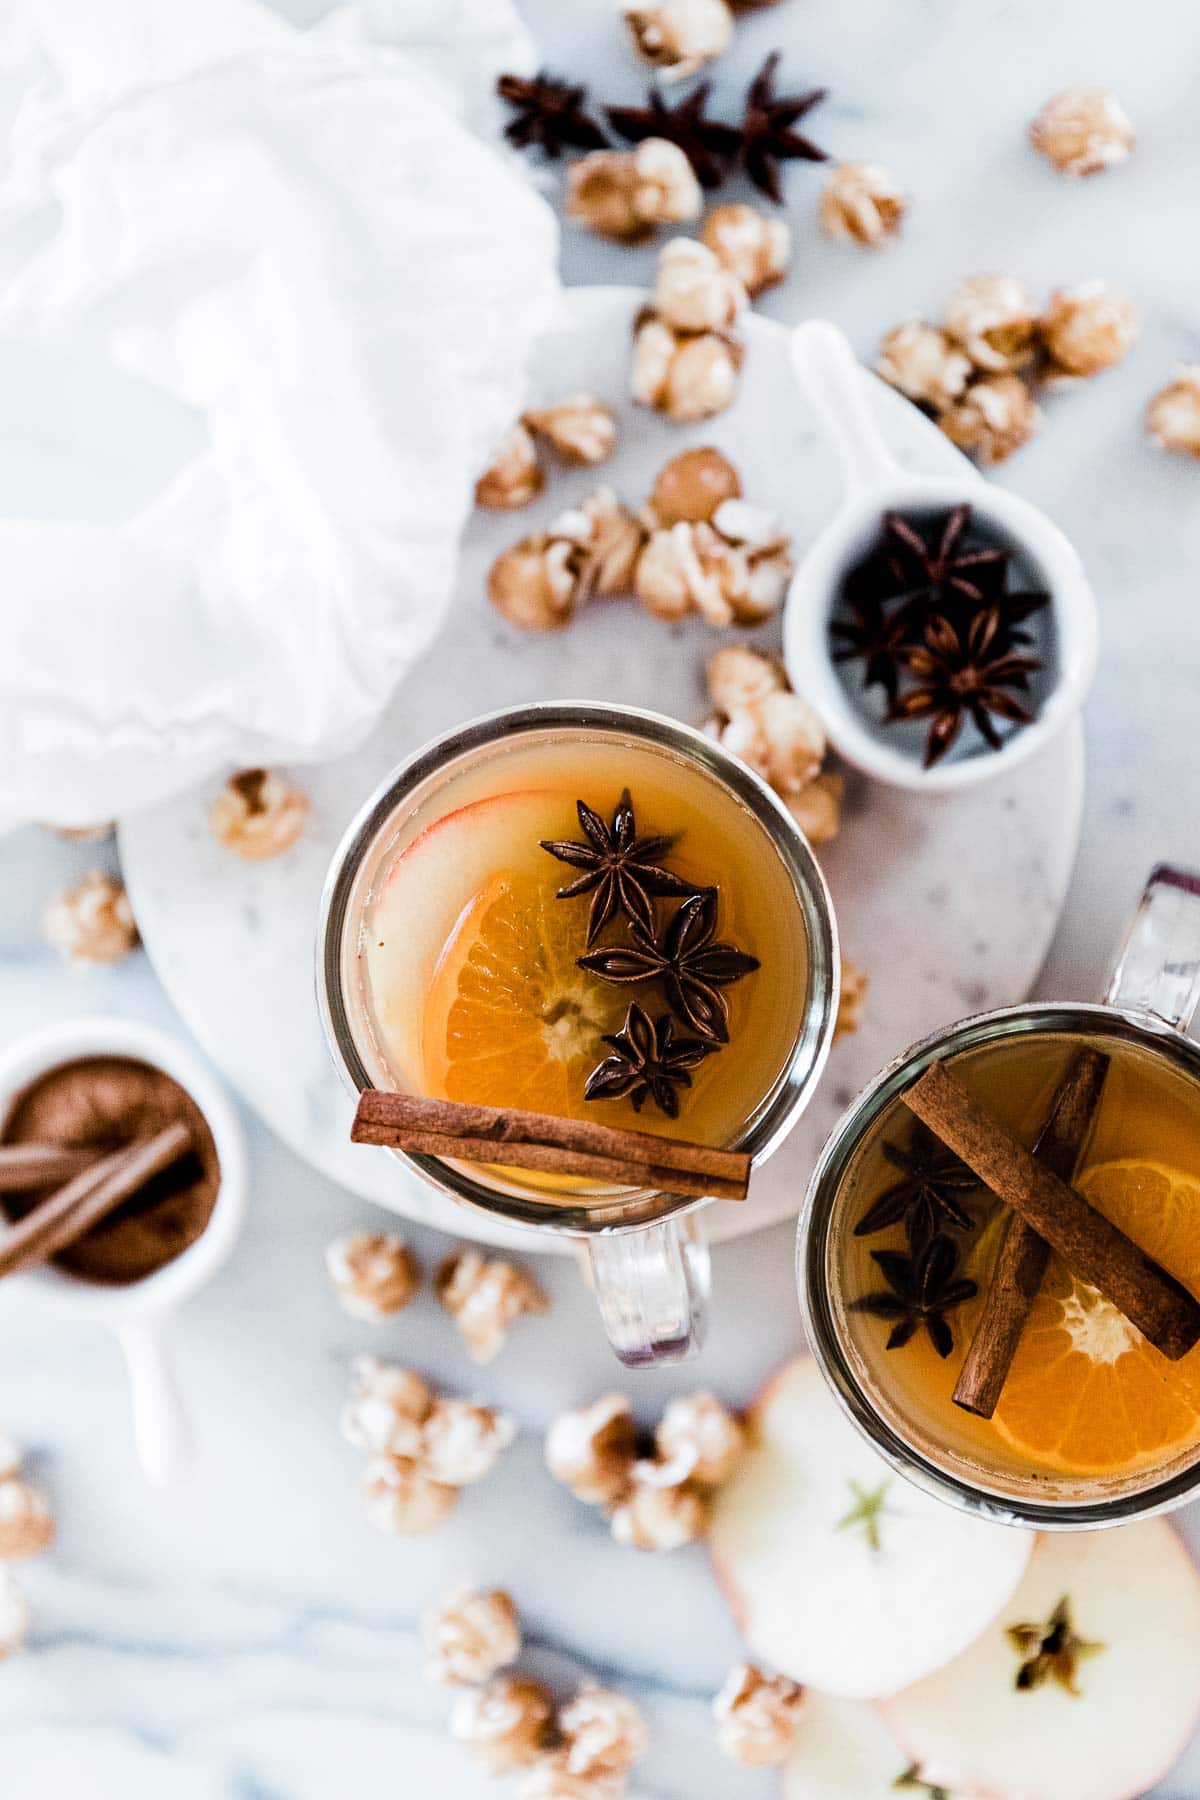 Mulled cider recipe in glass mugs on a marble counter. There is caramel corn scattered around.